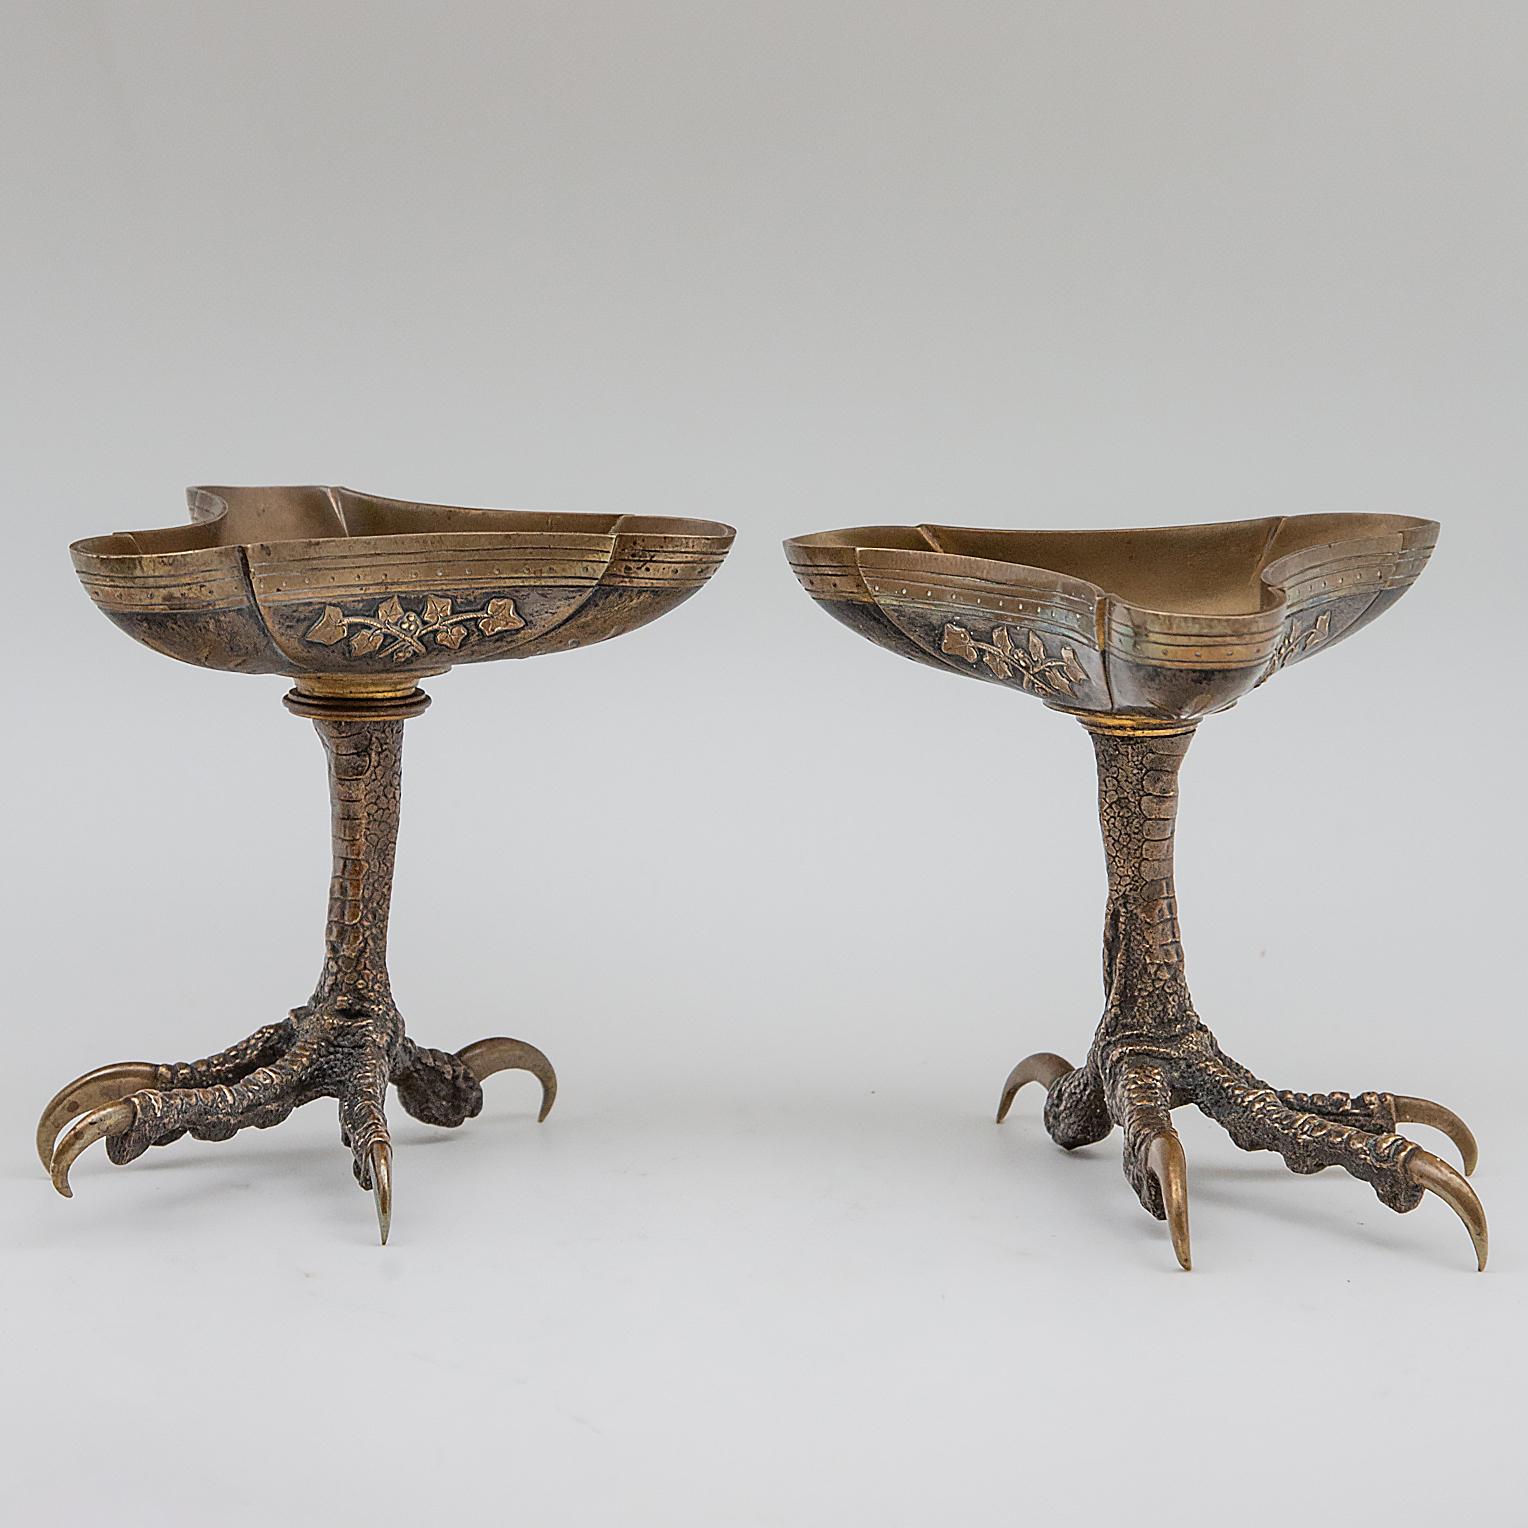 Pair of bronze talon dishes with ivy motif. Measures: 6.5